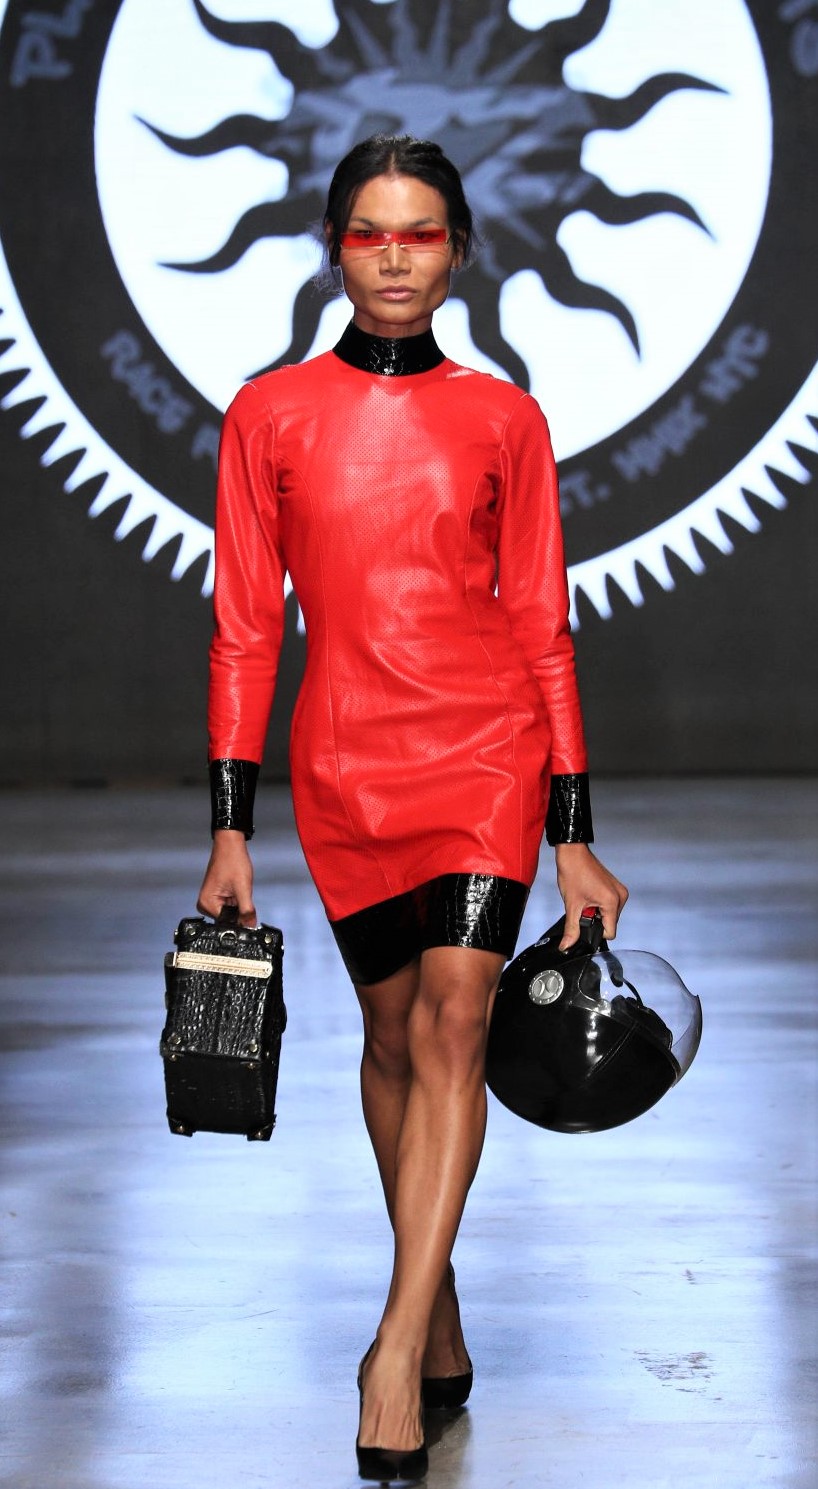 planet zero hand made in ny red leather dress pynck cropped.jpg